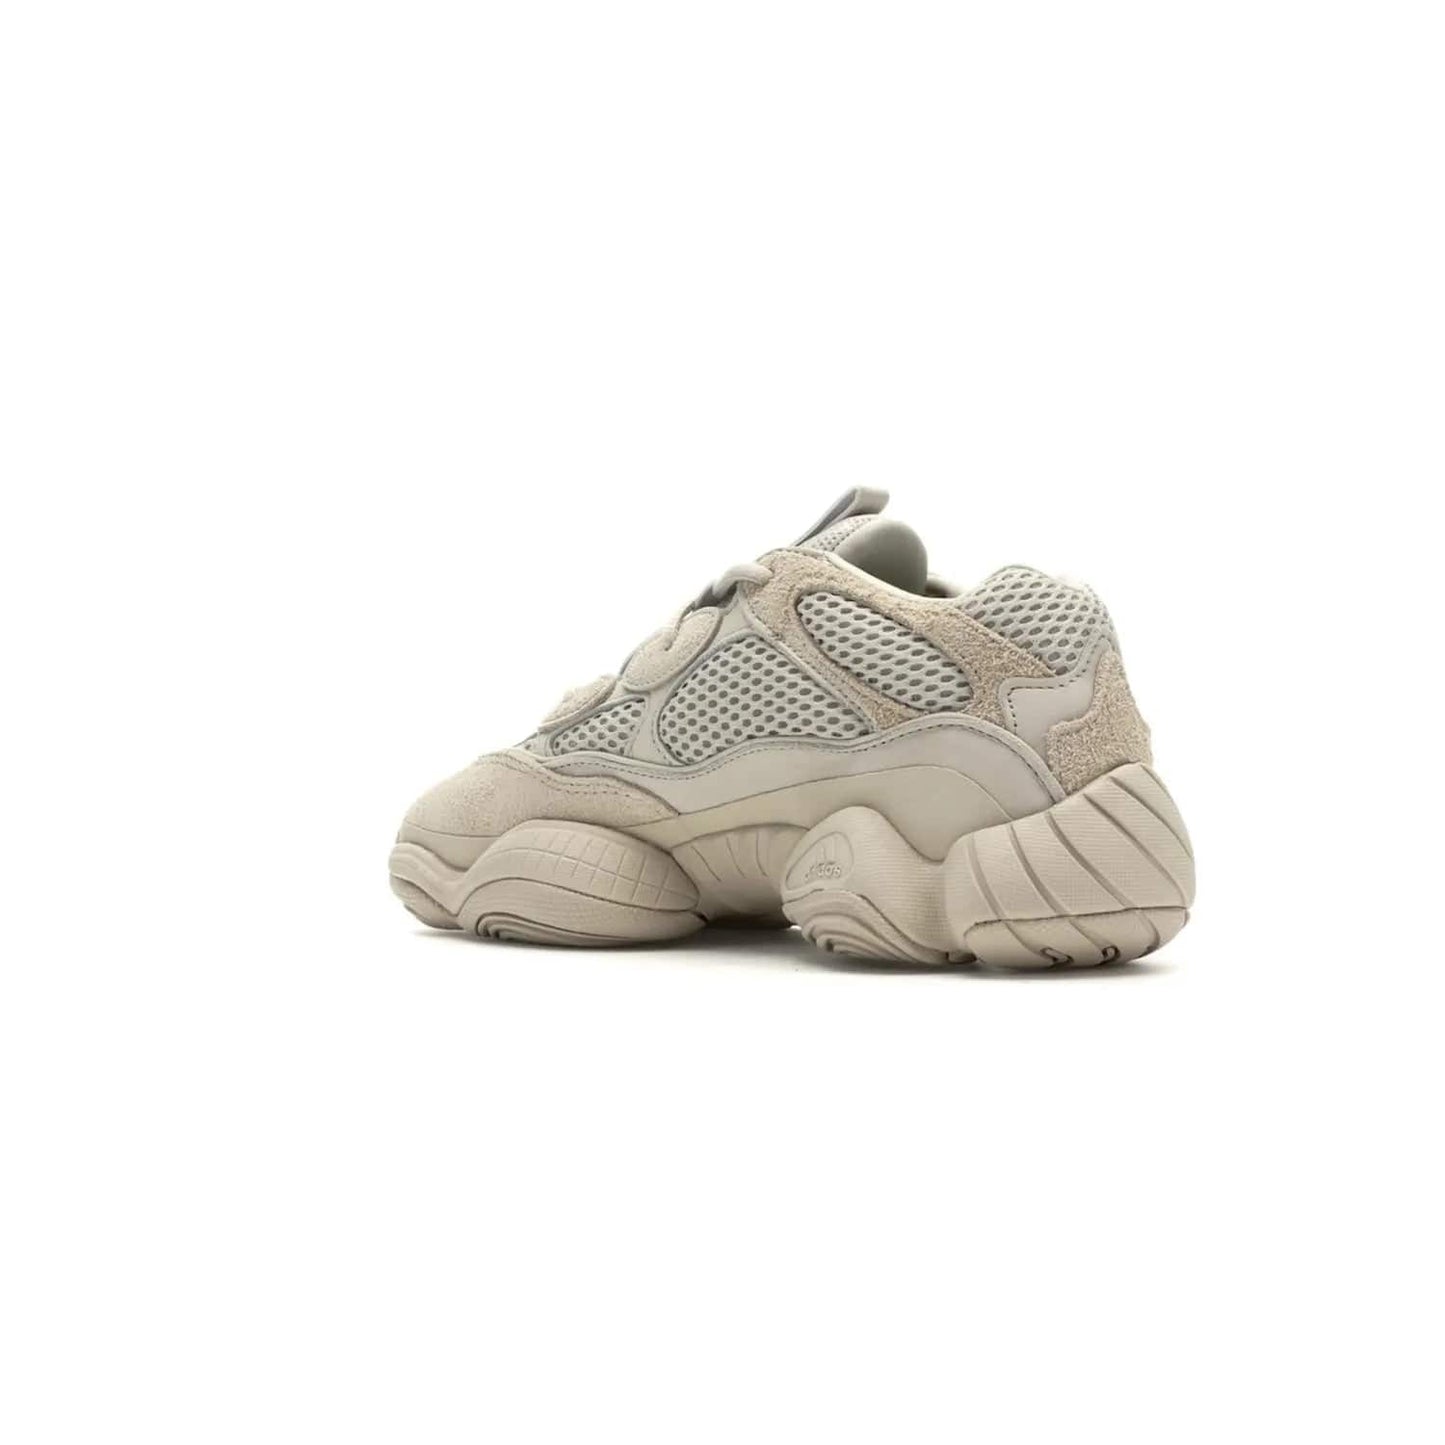 adidas Yeezy 500 Blush - Image 23 - Only at www.BallersClubKickz.com - Step up your sneaker game with the Adidas Yeezy 500 Blush. Monochromatic pale pink palette, hiking-inspired suede/mesh construction, plus adiPRENE sole for comfort and performance. Get the Adidas Yeezy 500 and experience true style and comfort.